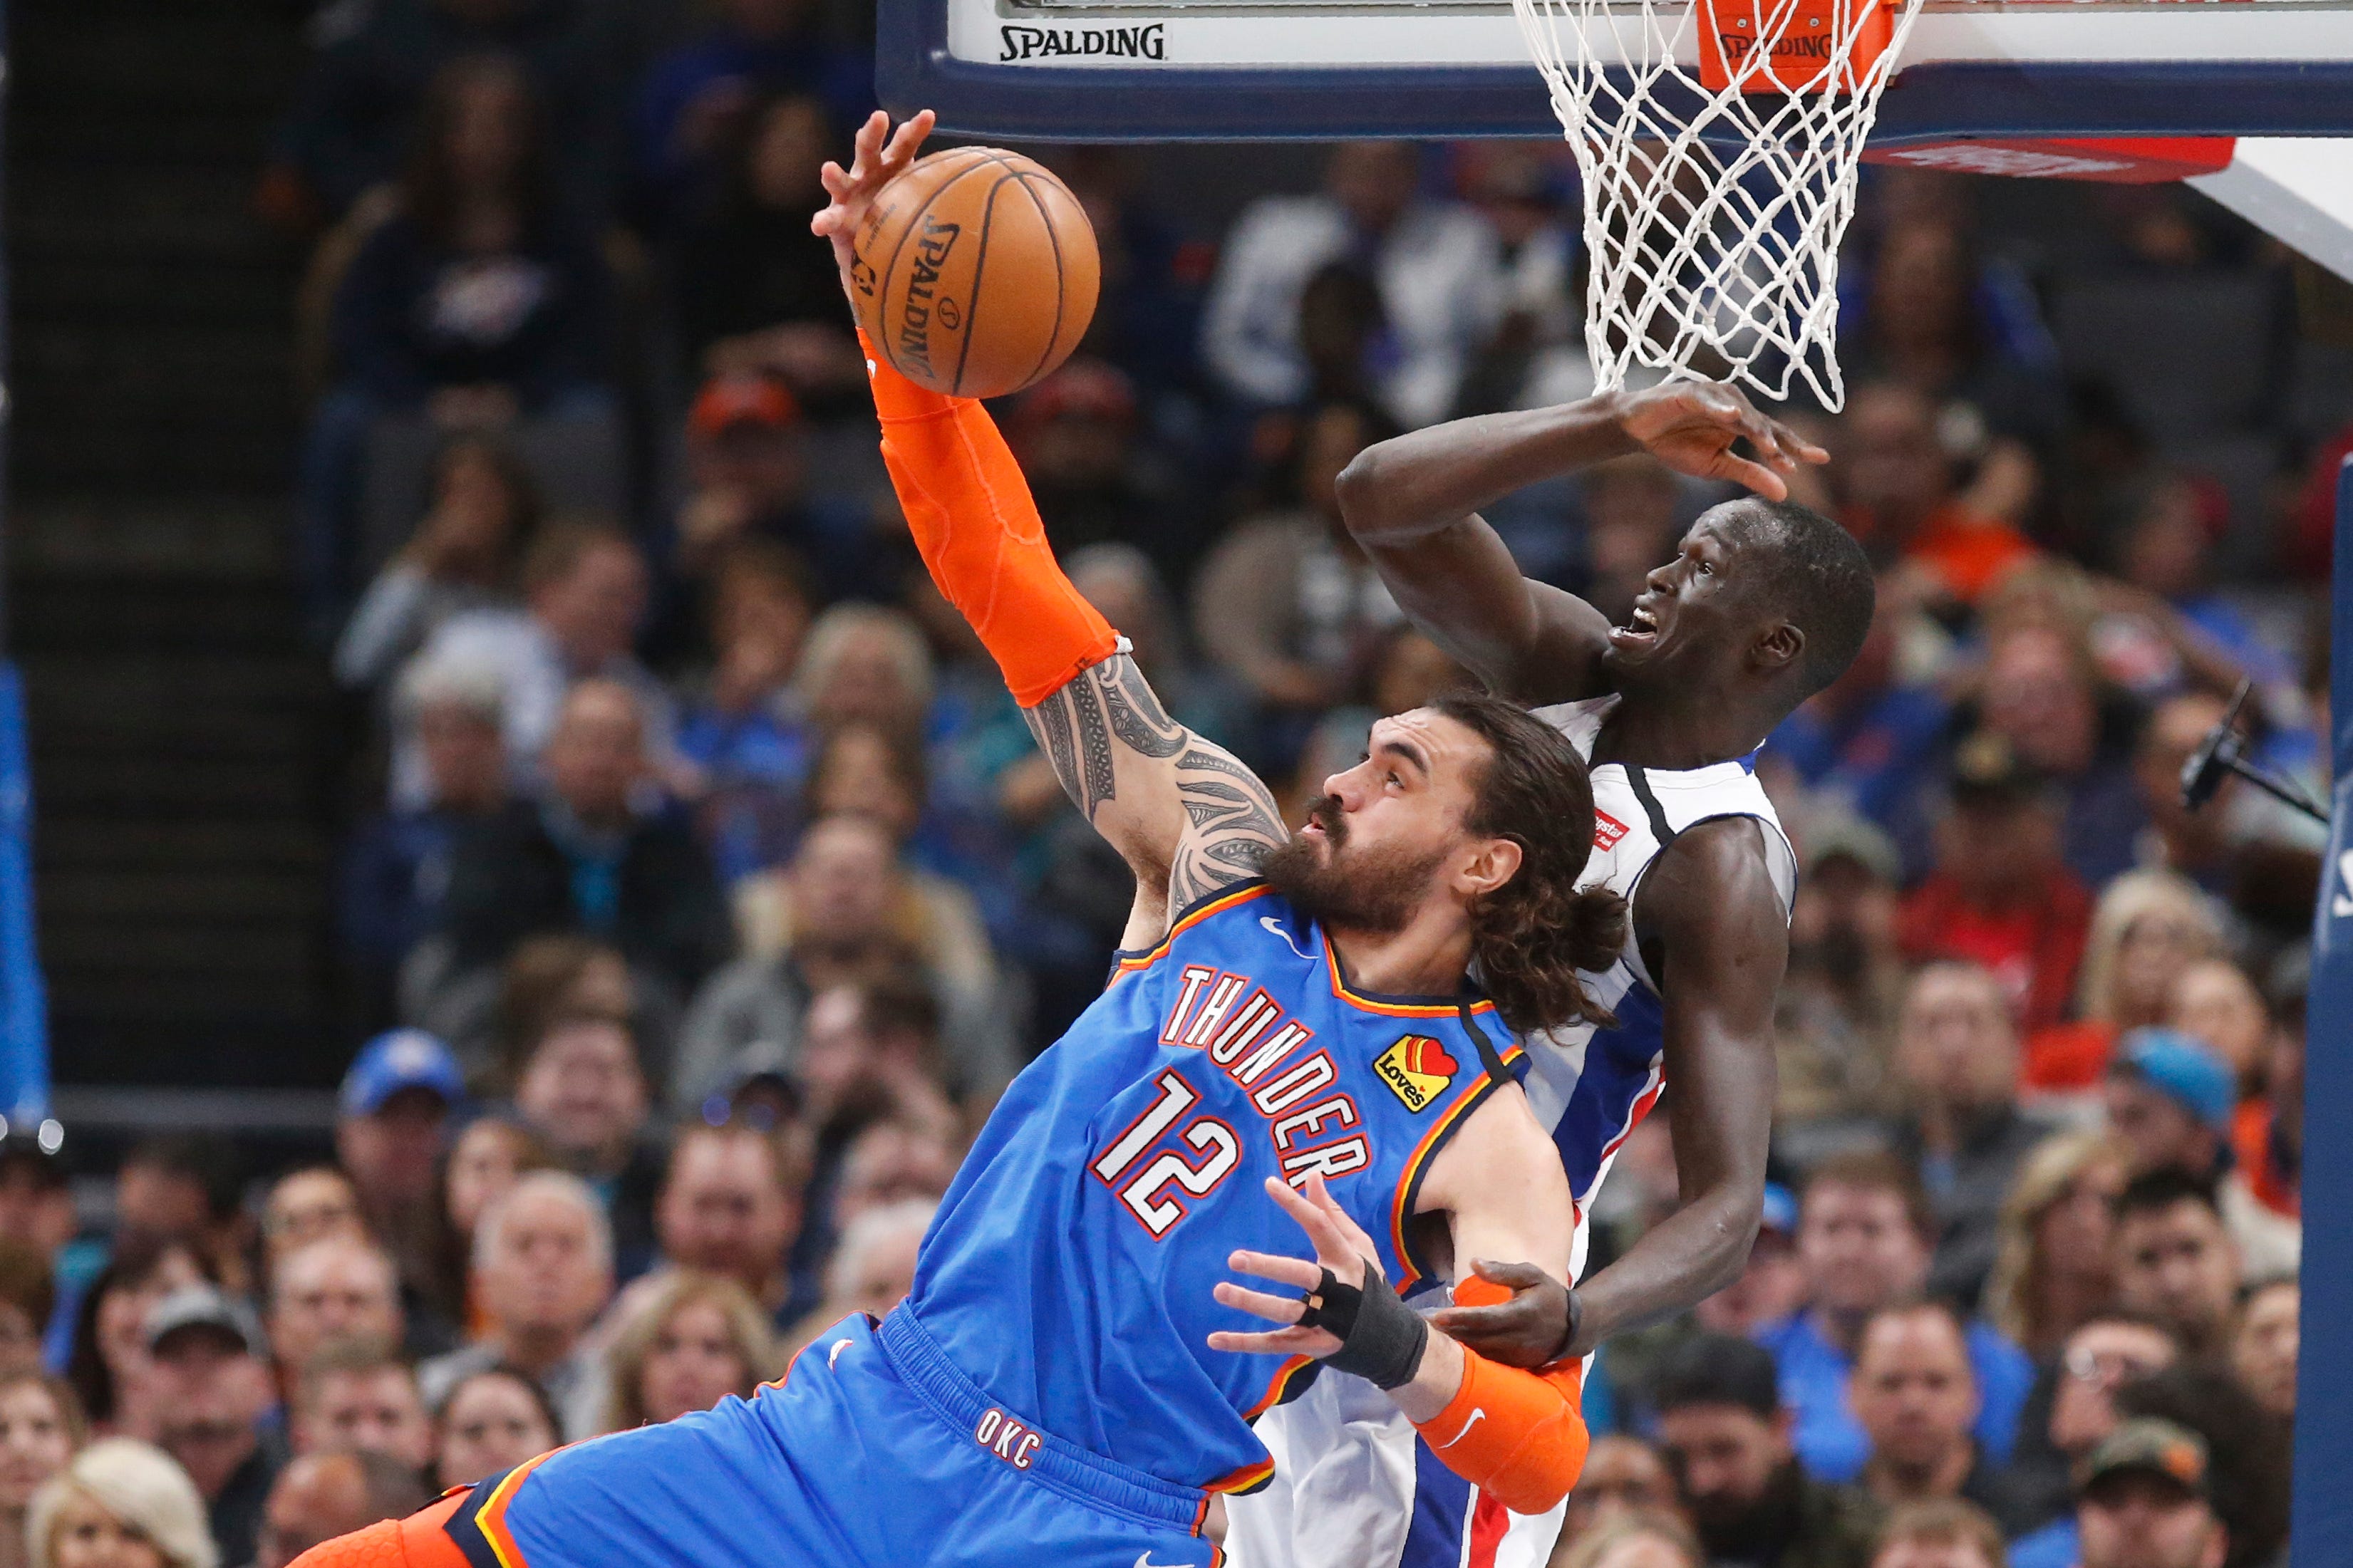 Oklahoma City Thunder center Steven Adams (12) reaches for a pass in front of Detroit Pistons forward Thon Maker, right, during the first half.